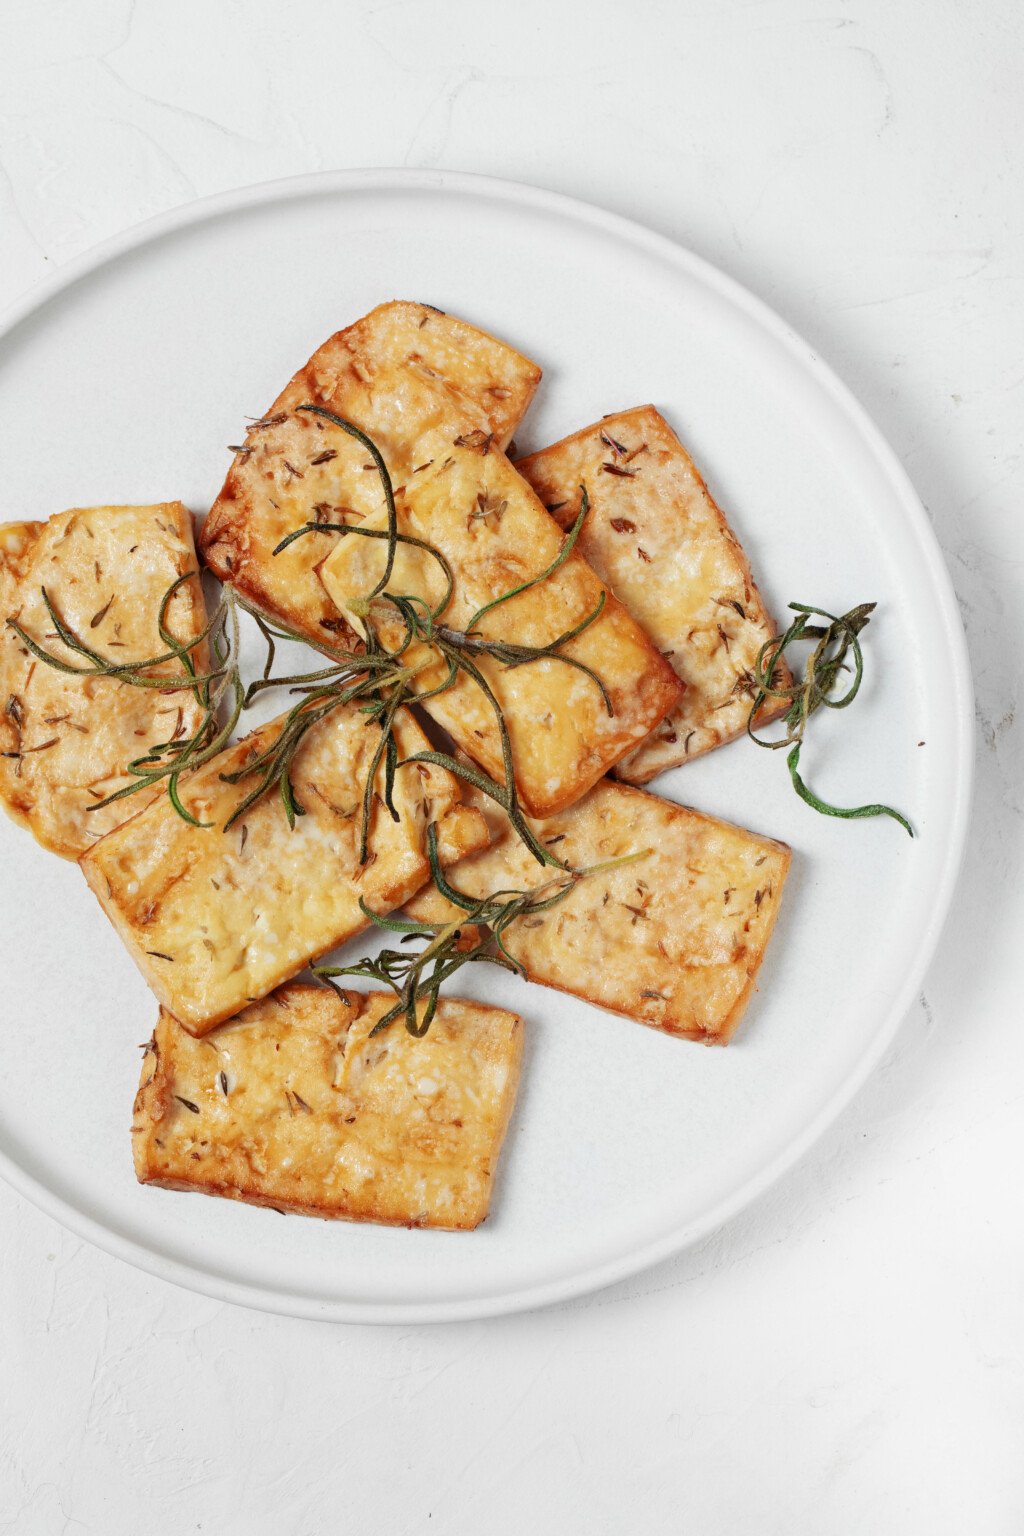 A round, white plate has been topped with golden baked tofu slices and rosemary leaves.